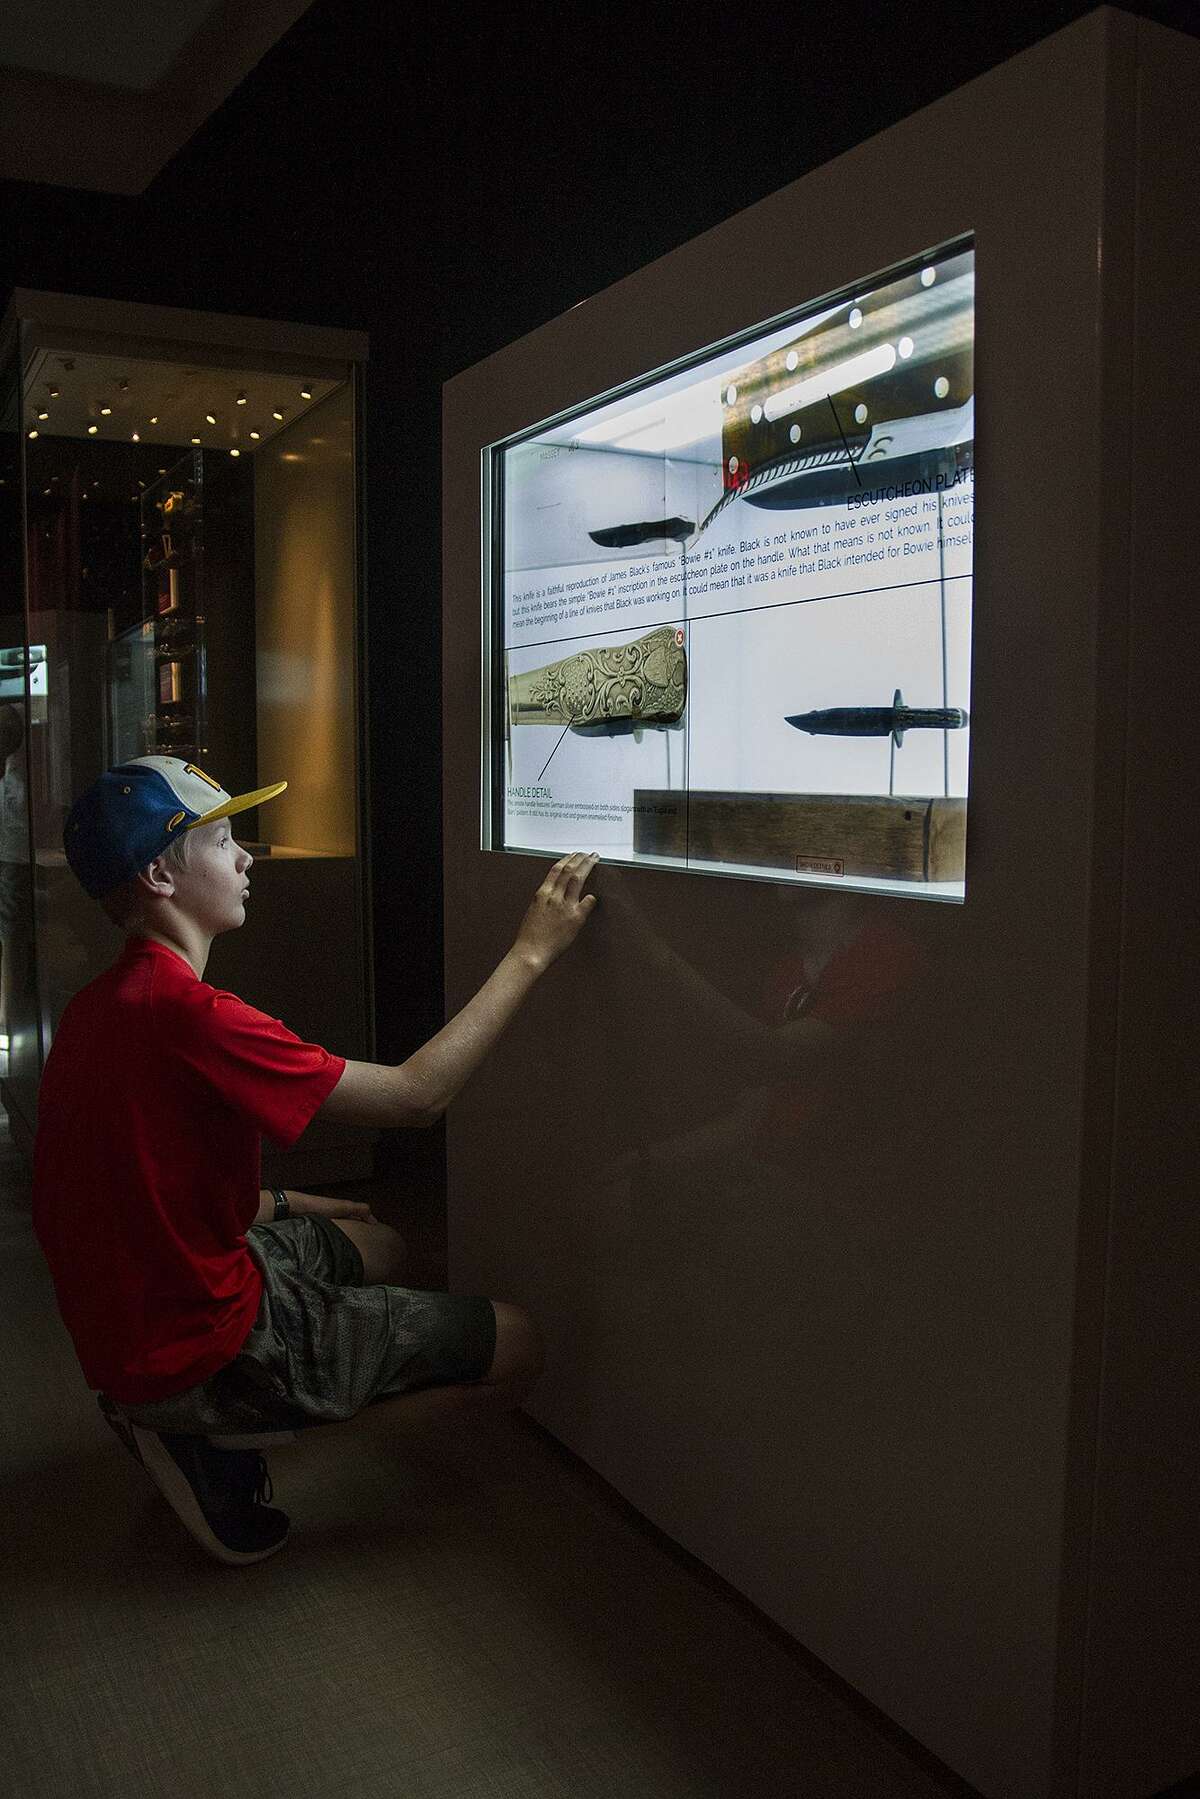 Aiden Eagon, 11, at an interactive touchscreen in the Jim Bowie exhibit at the Alamo April, 7. The screen uses translucent touchscreen technology allowing patrons to click the screen for detailed information about the artifacts featured.